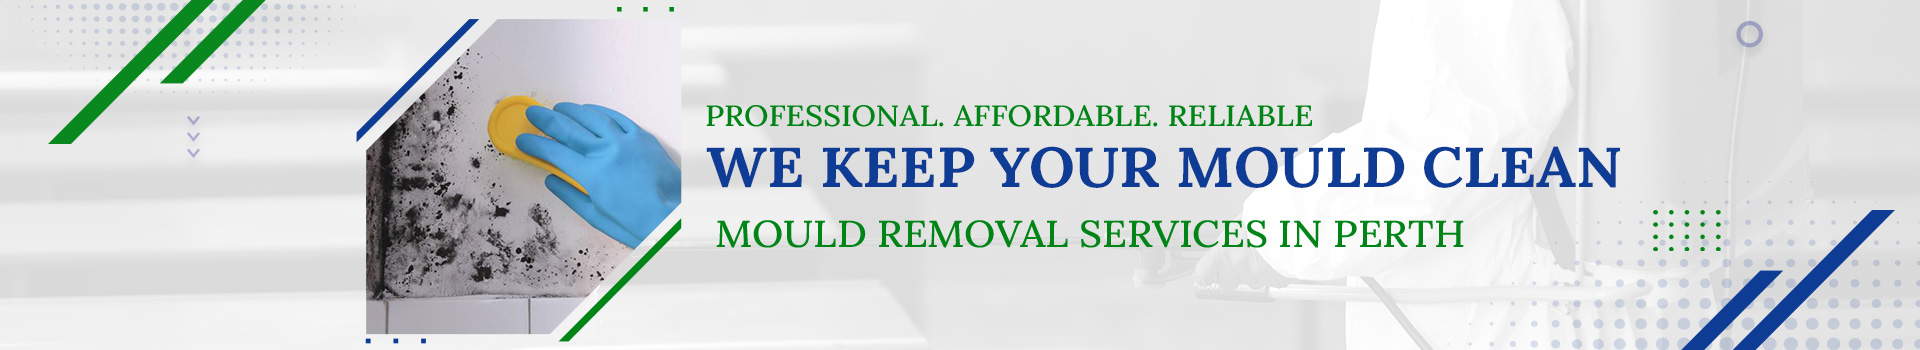 Mould Removal services in Perth